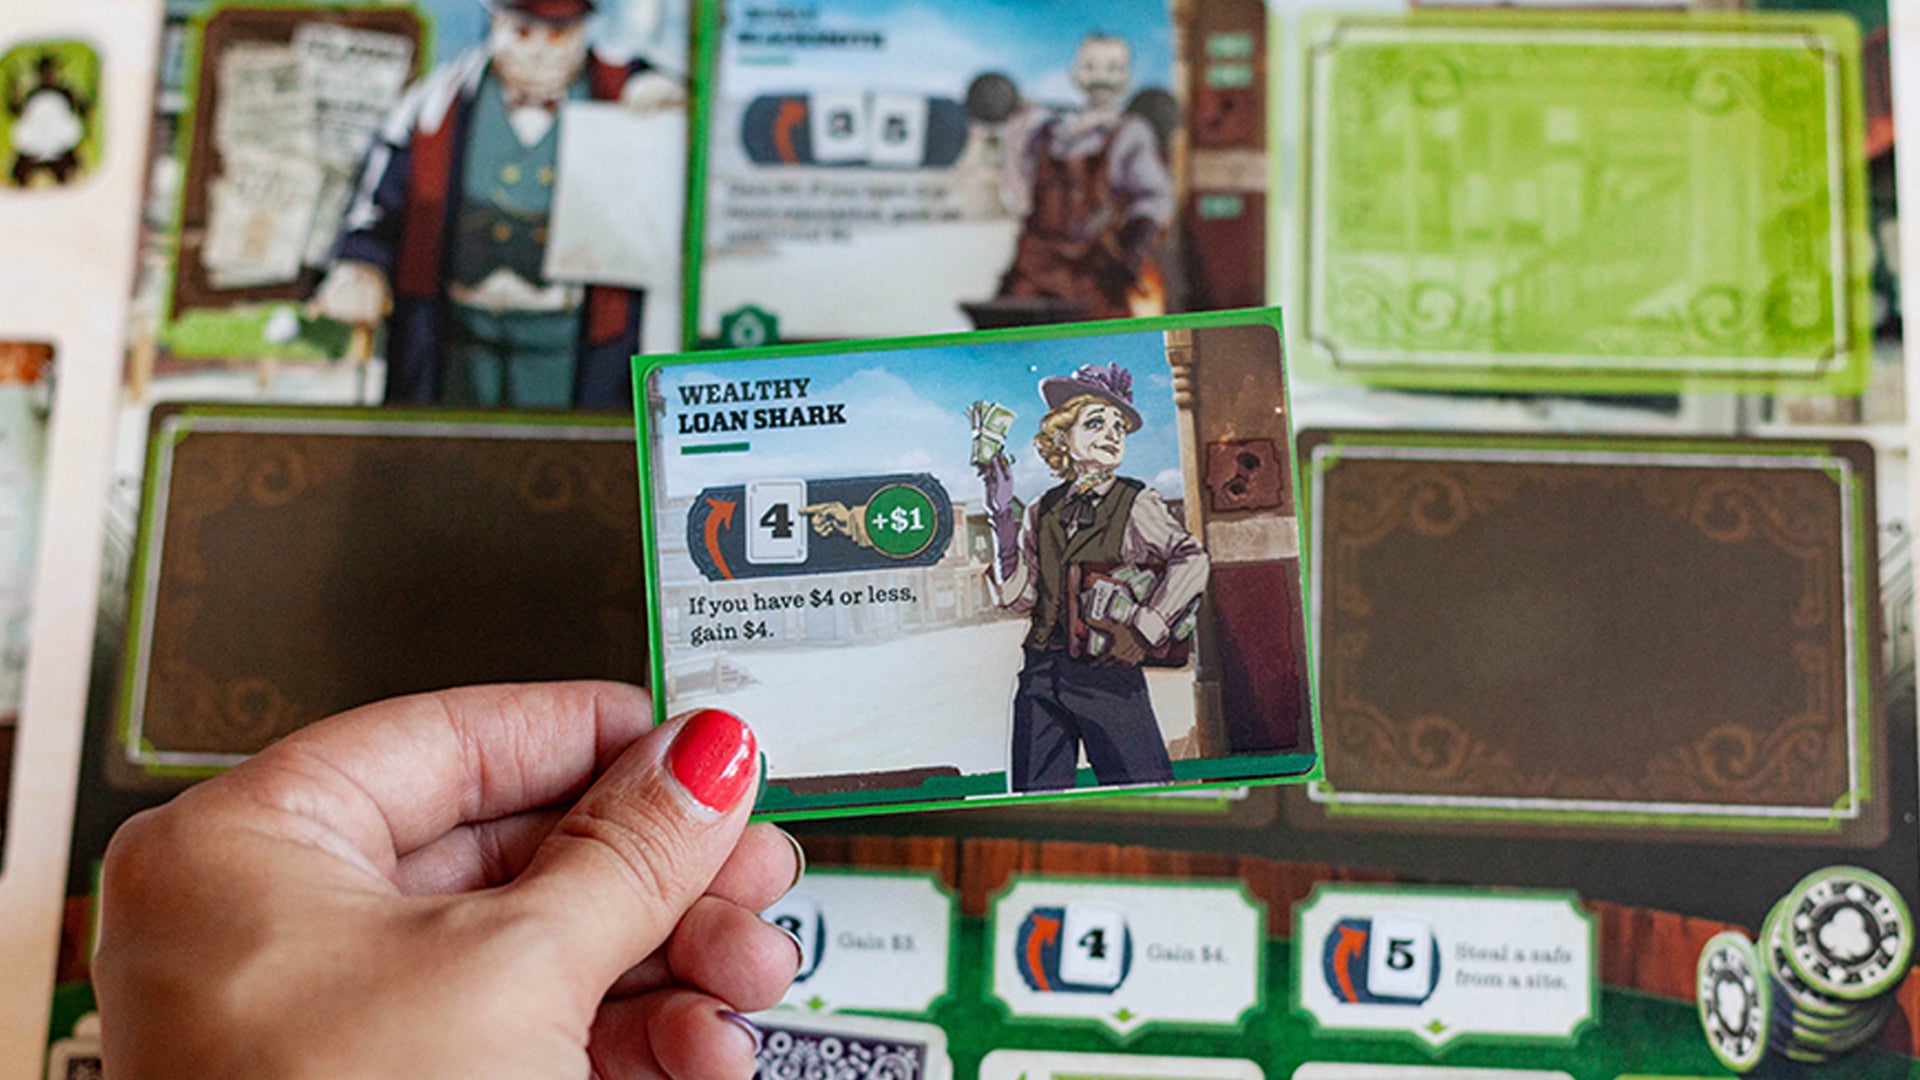 Image for Mansions of Madness and Star Wars: Rebellion designer’s next board game lets you create thousands of unique characters